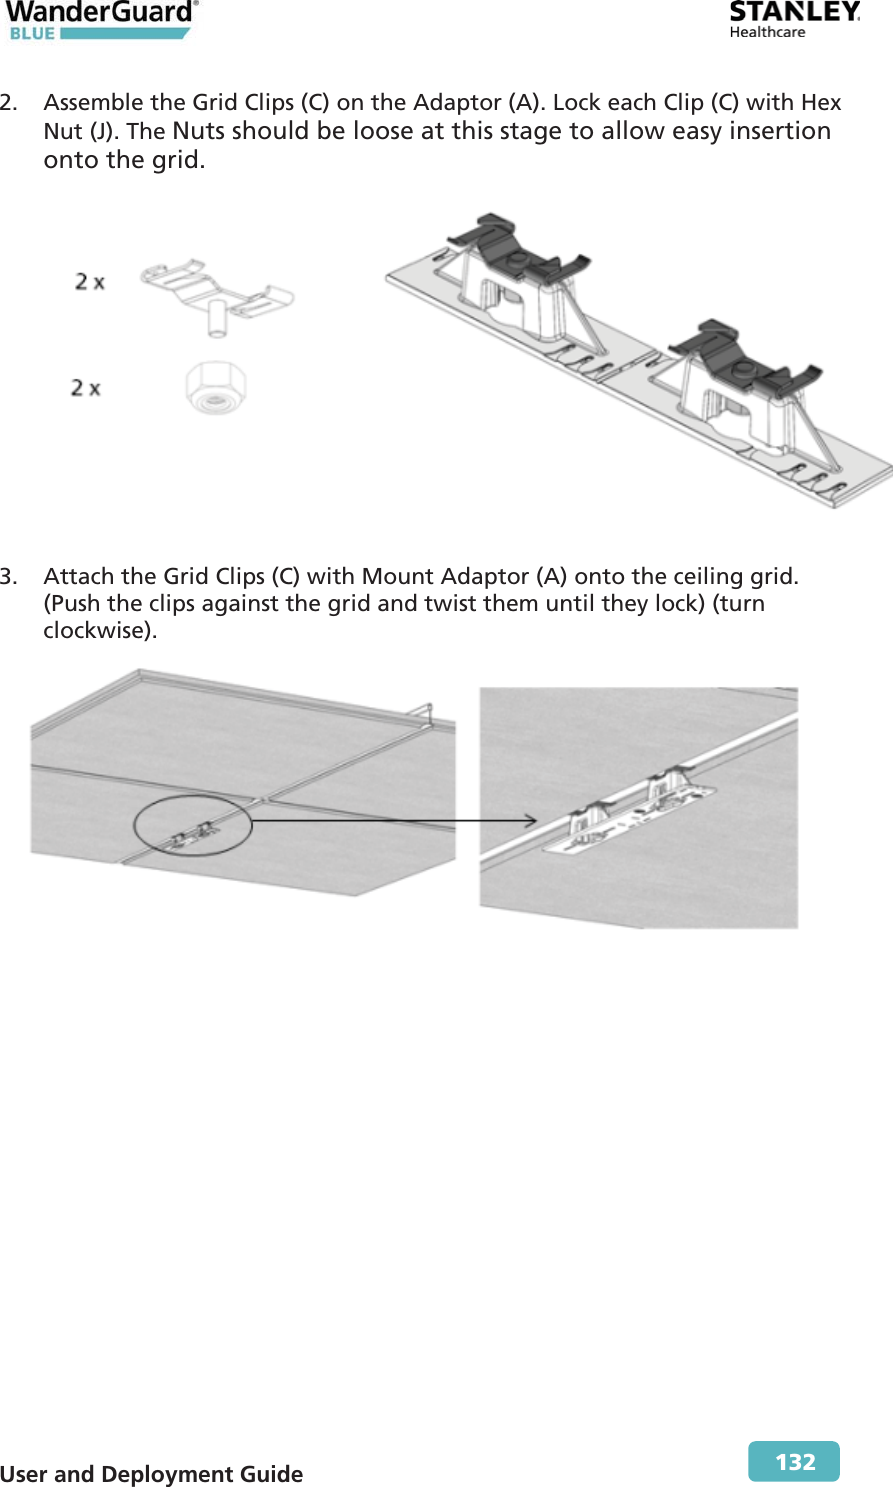  User and Deployment Guide        132 2. Assemble the Grid Clips (C) on the Adaptor (A). Lock each Clip (C) with Hex Nut (J). The Nuts should be loose at this stage to allow easy insertion onto the grid.  3. Attach the Grid Clips (C) with Mount Adaptor (A) onto the ceiling grid. (Push the clips against the grid and twist them until they lock) (turn clockwise).  